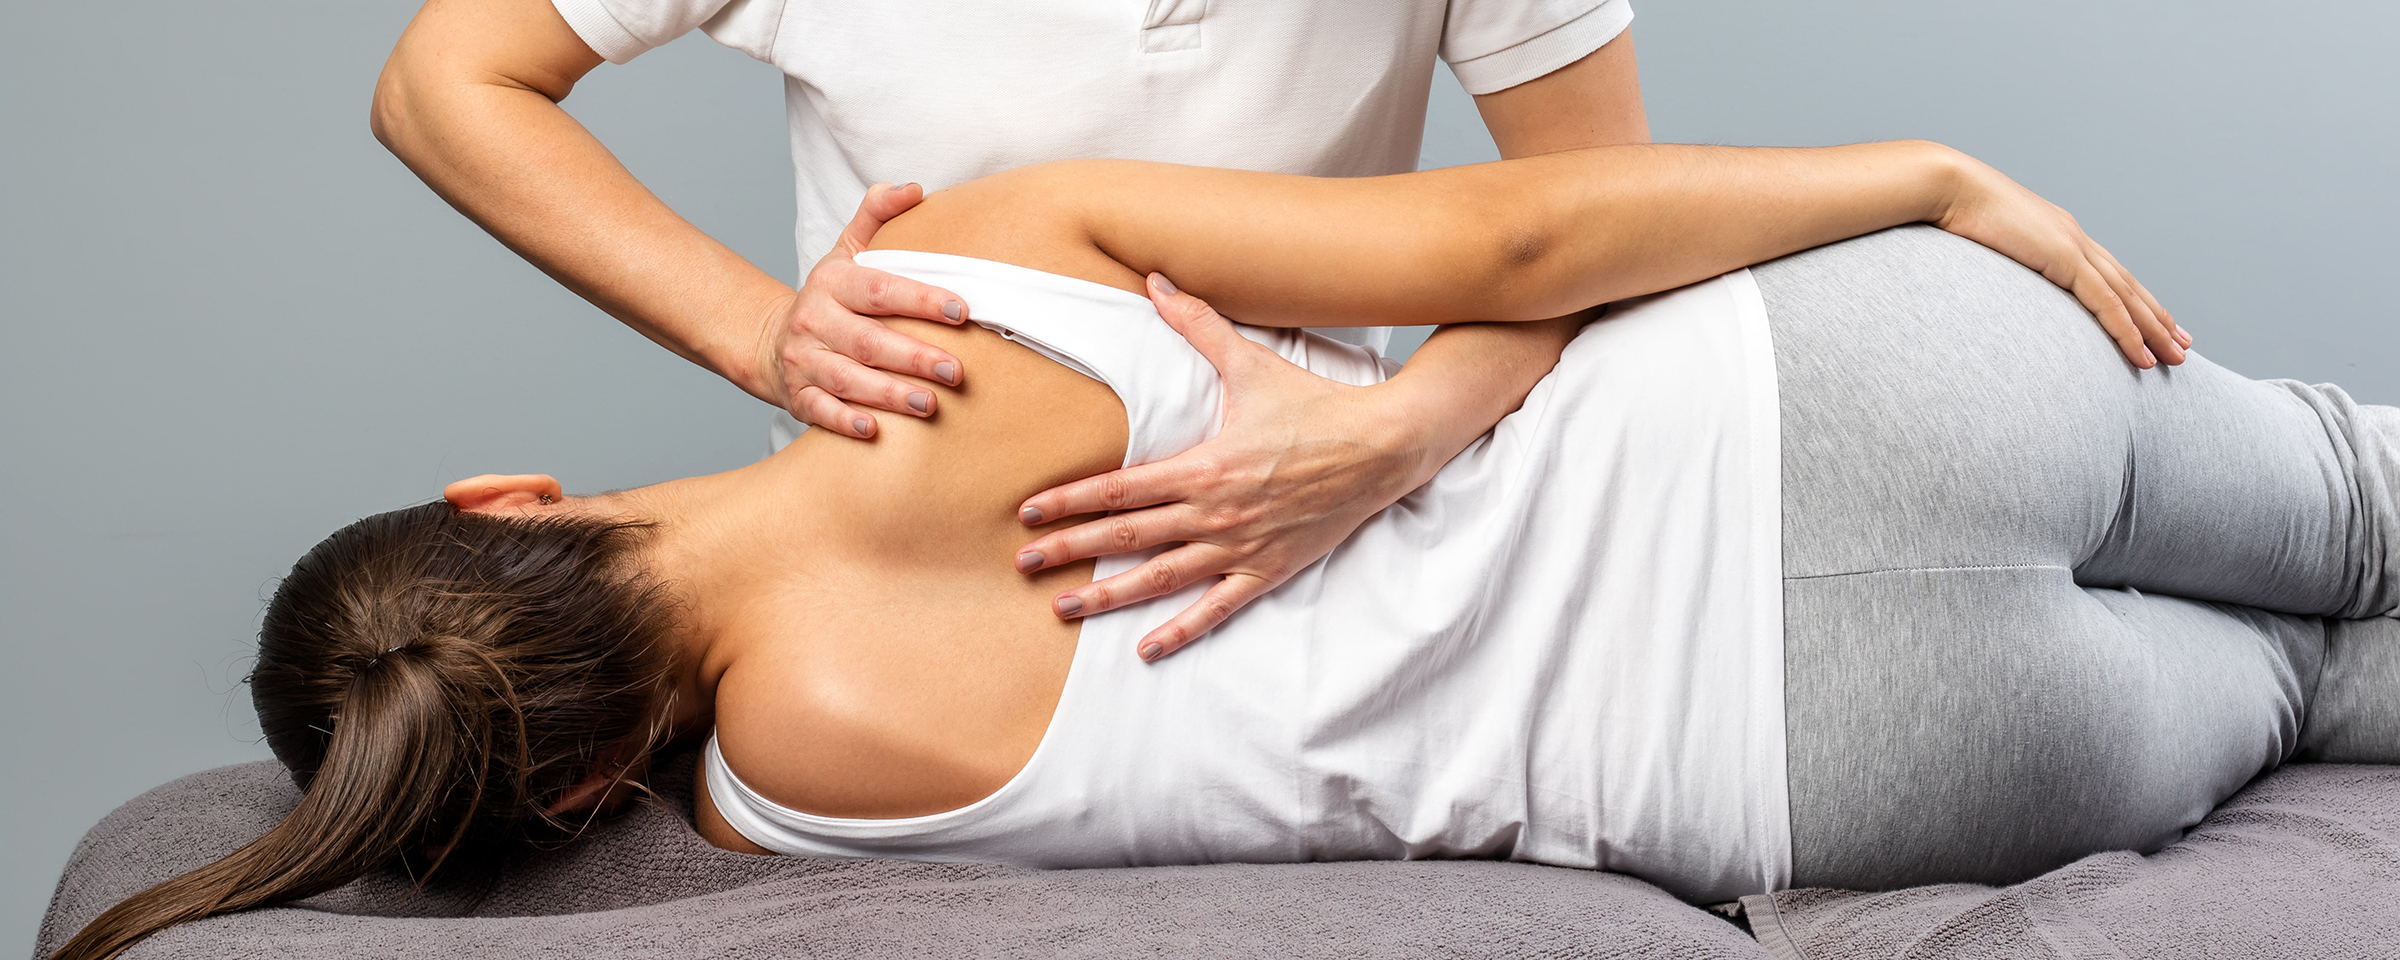 Chiropractor can Boost your Libido